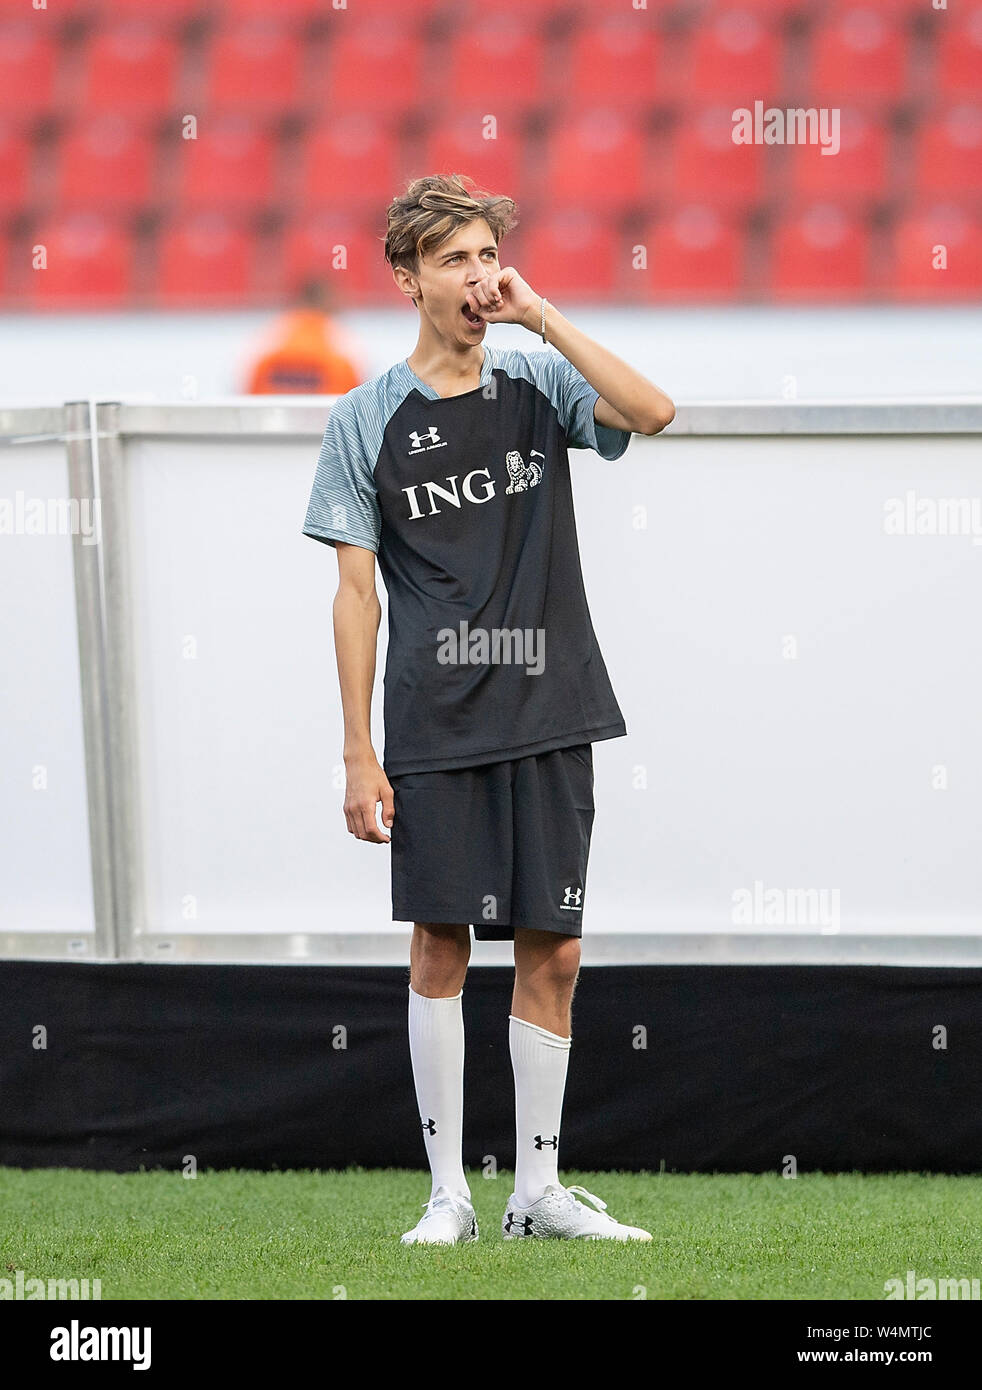 Leverkusen, Deutschland. 21st July, 2019. Lukas RIEGER is Muede, battles, Champions for Charity, the charity football game in honor of Michael Schumacher, Team Nowitzki All Stars (Team N) - Team Schumacher and Friends (Team S) on 21.07.2019 in Leverkusen/Germany. | Usage worldwide Credit: dpa/Alamy Live News Stock Photo